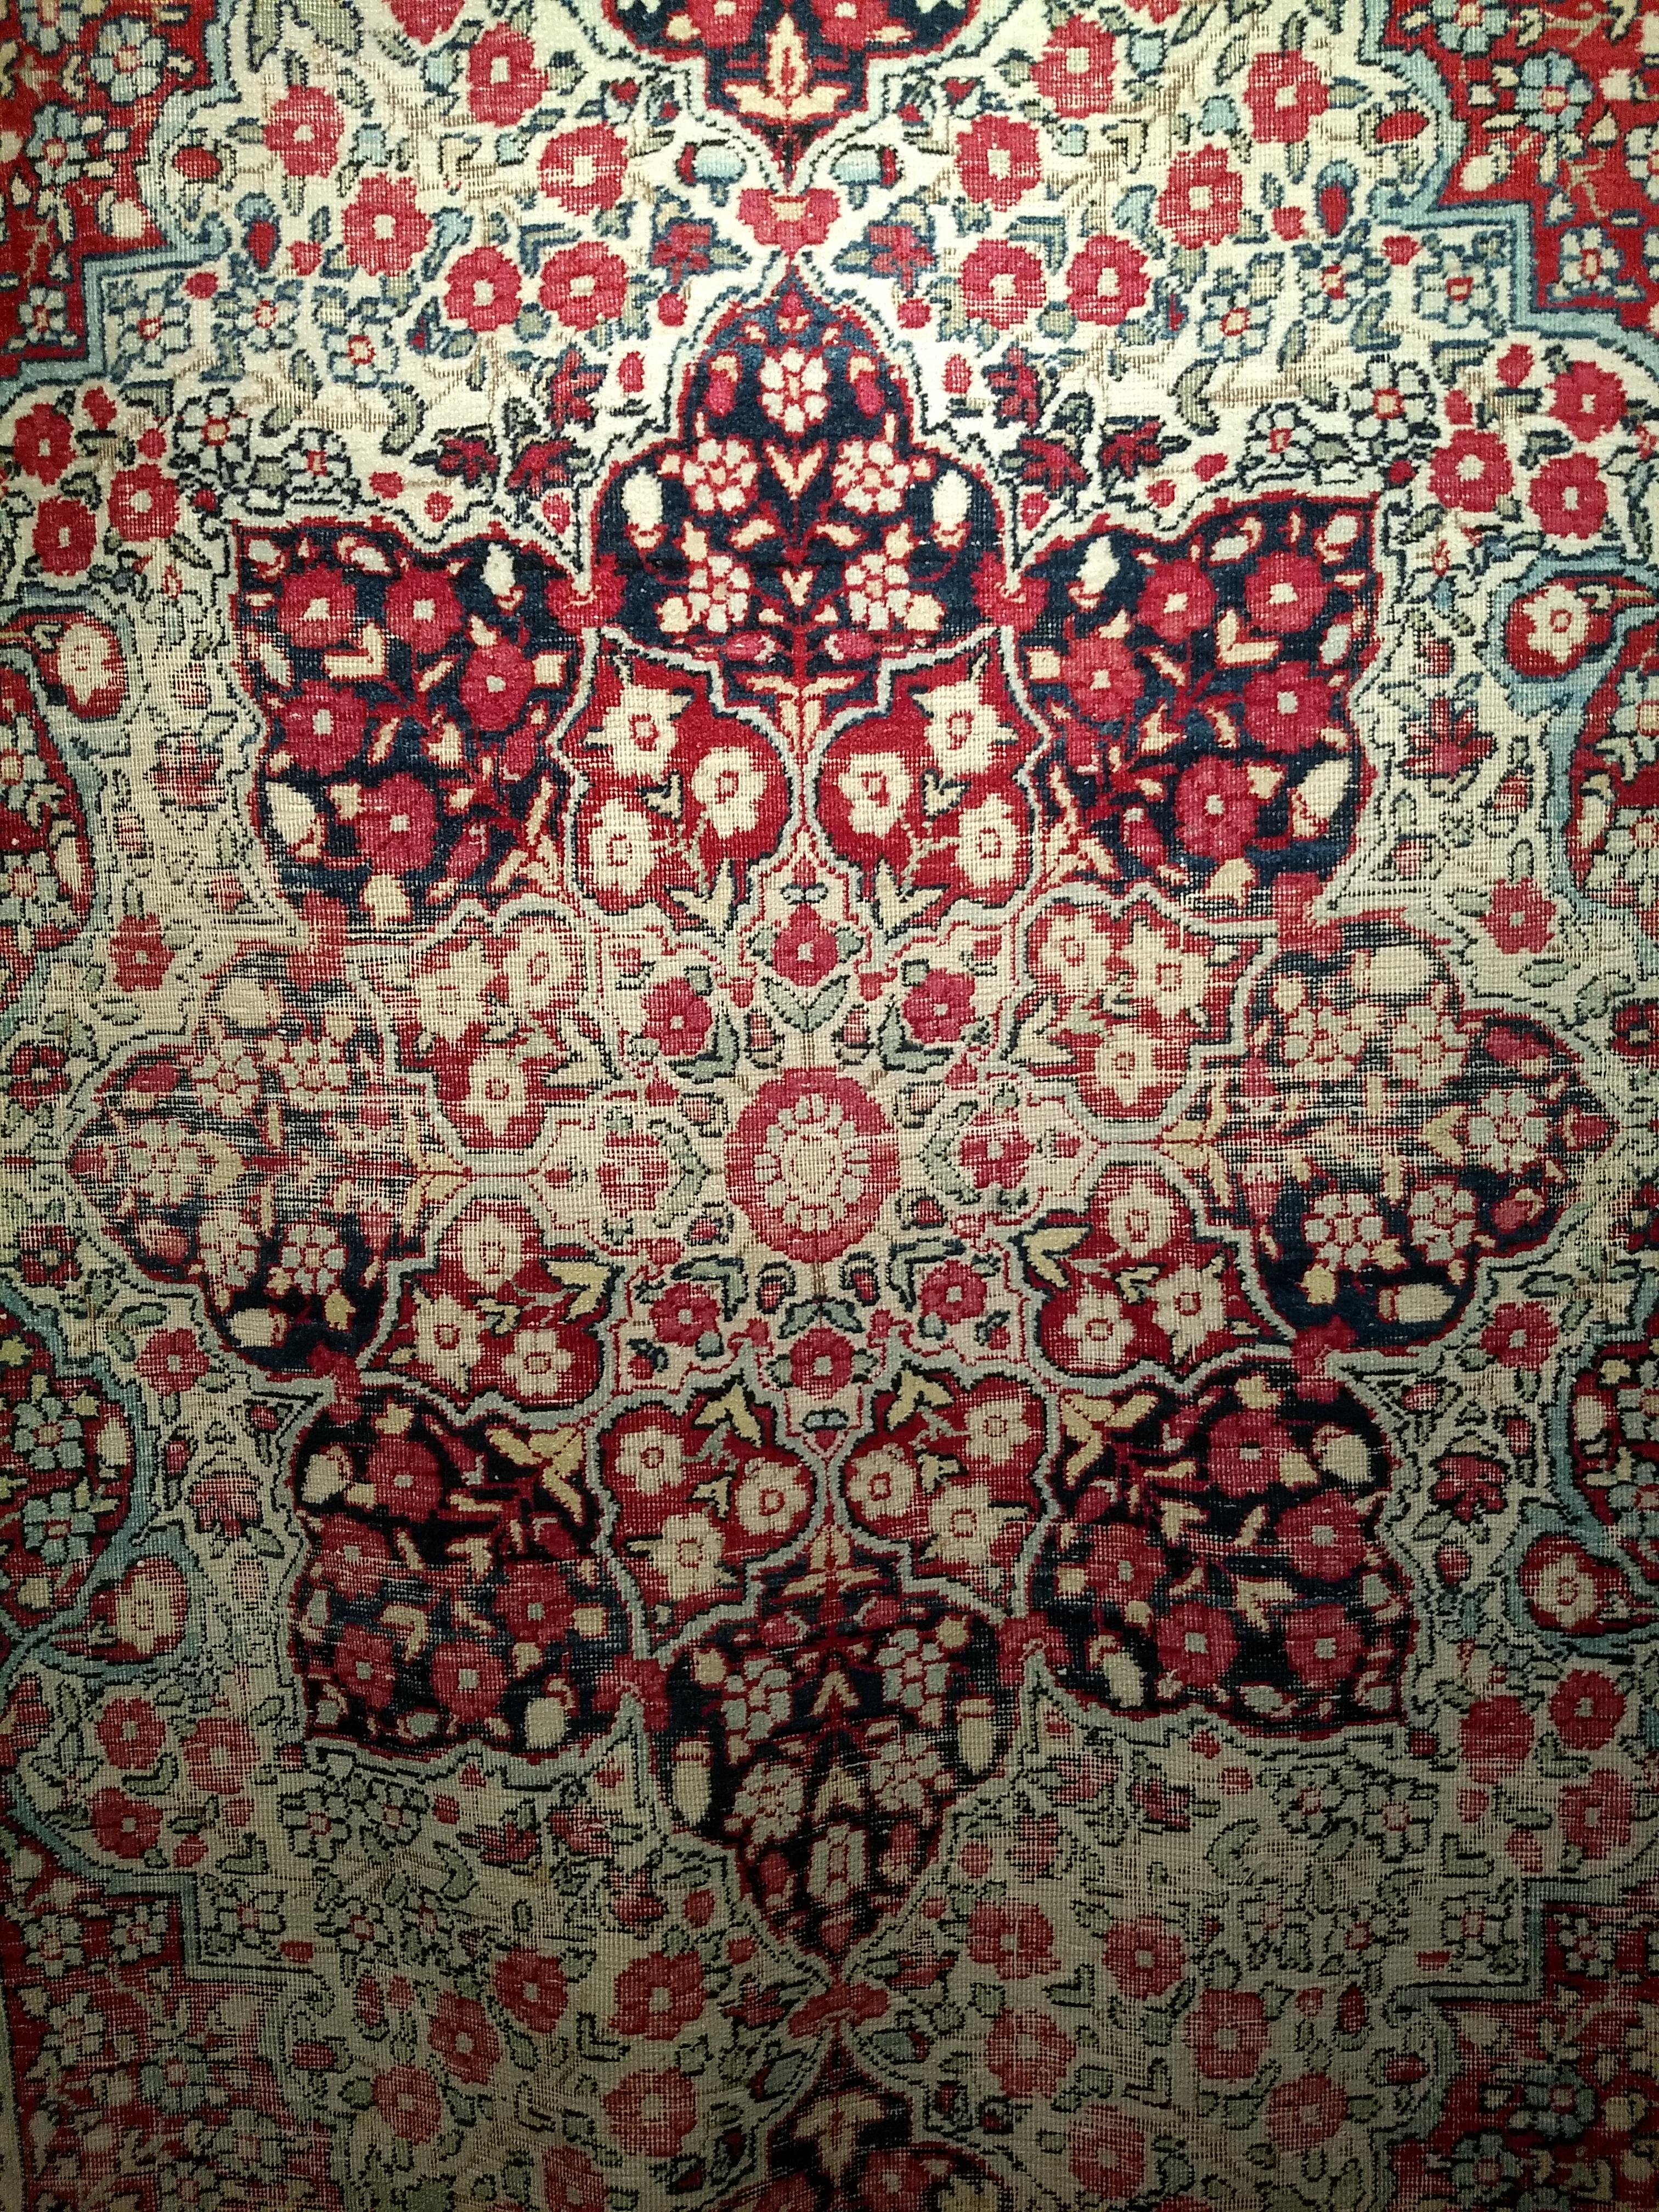 Hand-Woven 19th Century Persian Kerman Lavar Area Rug in Floral Design in Red, Ivory, Black For Sale